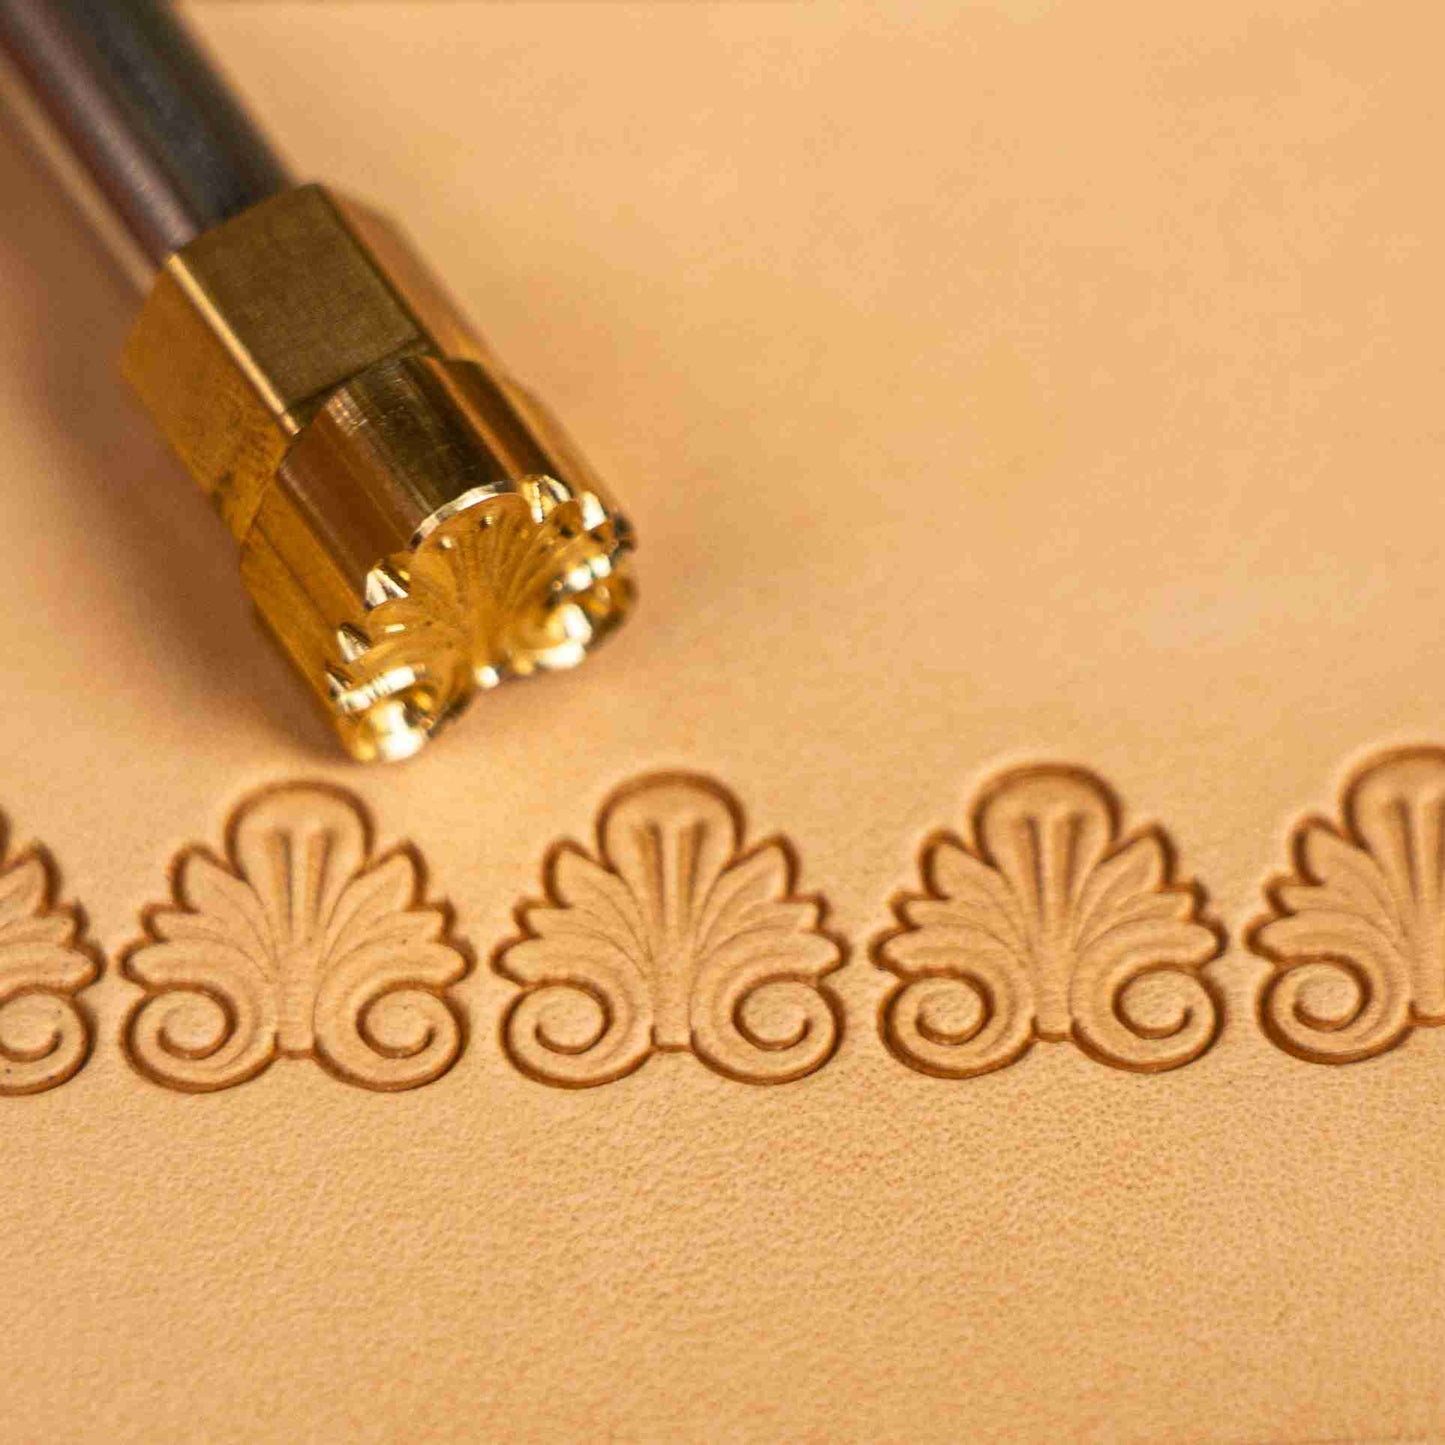 LT392 Premium Leather Stamping Tools for Professional Crafters - 14x14mm size